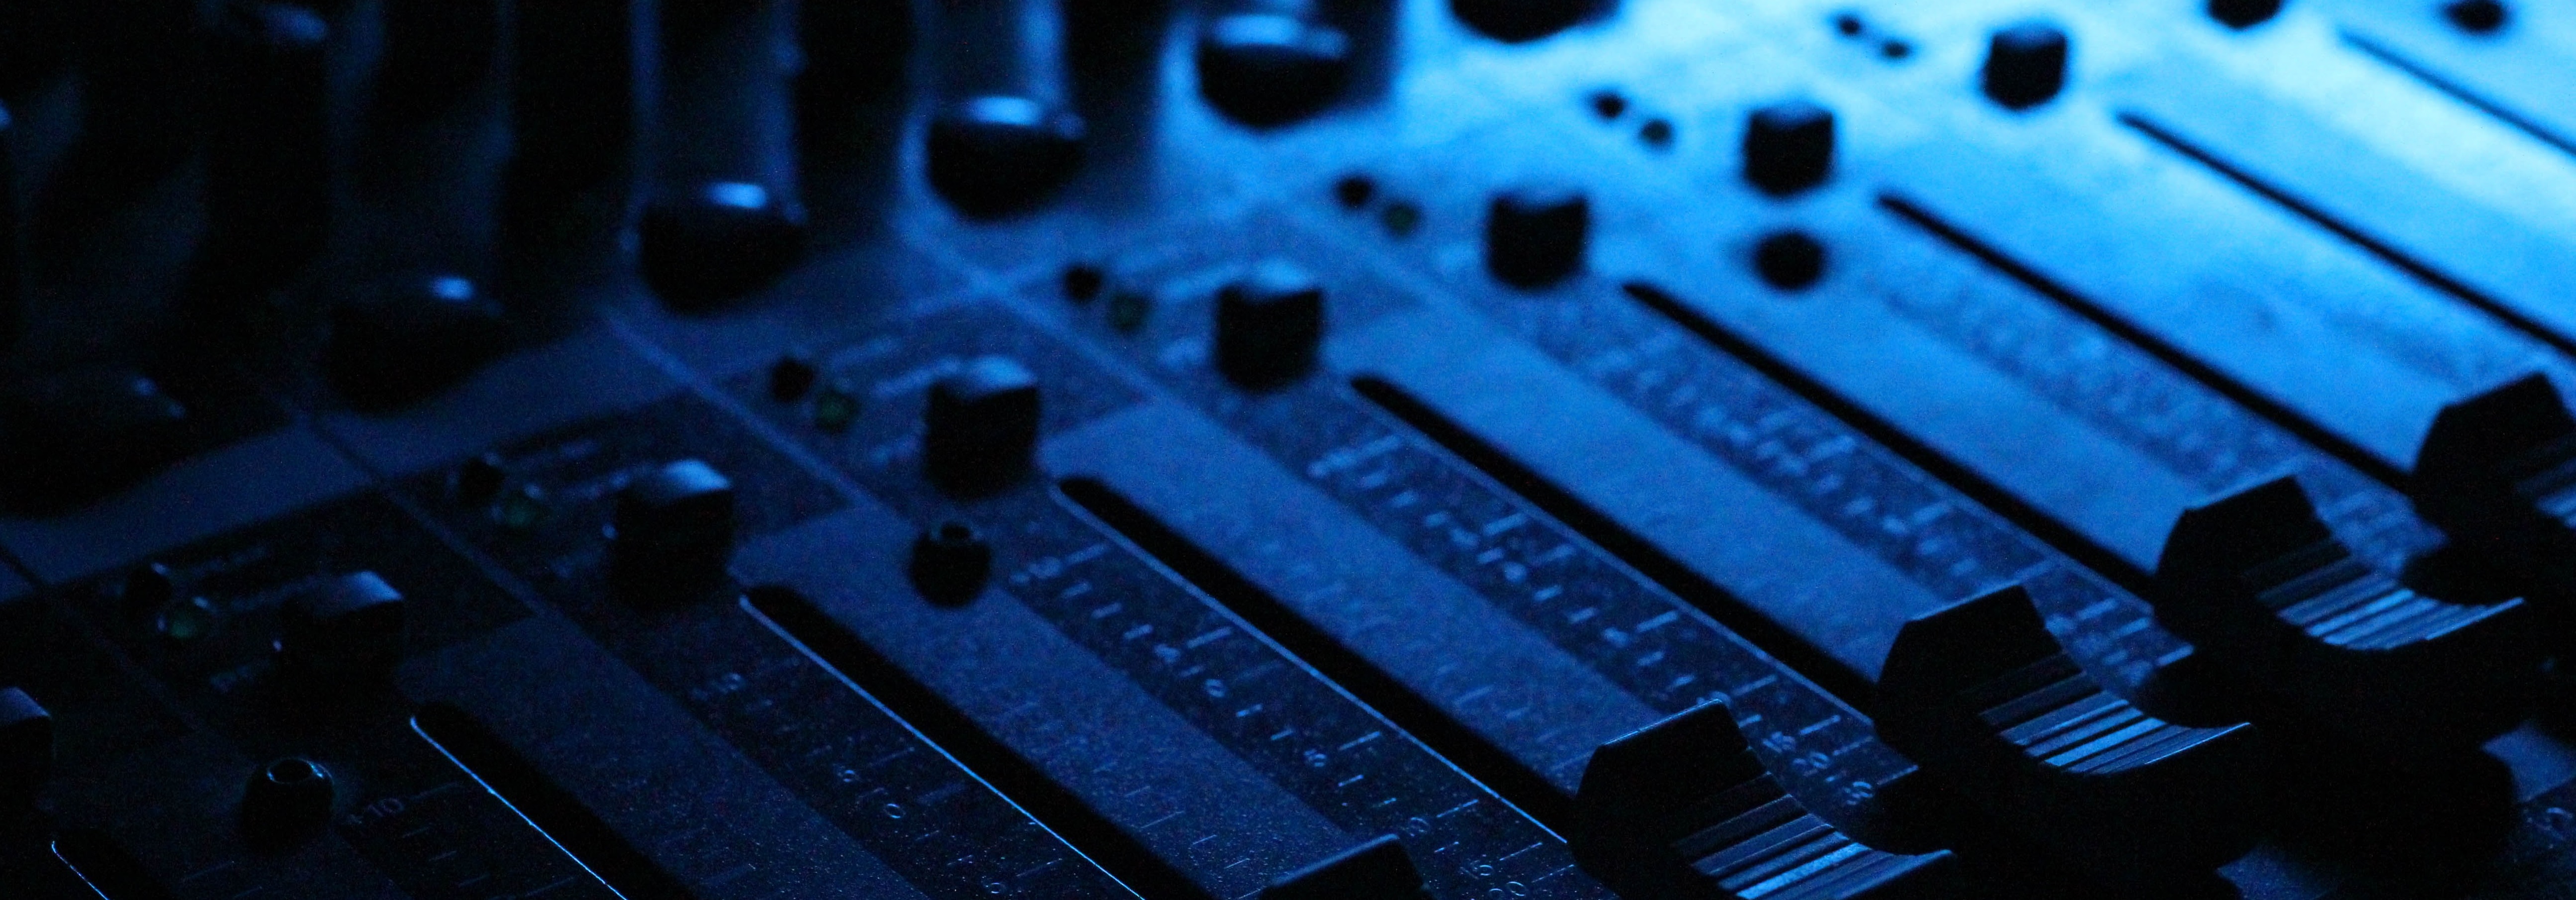 blue image of a close up view of a soundboard